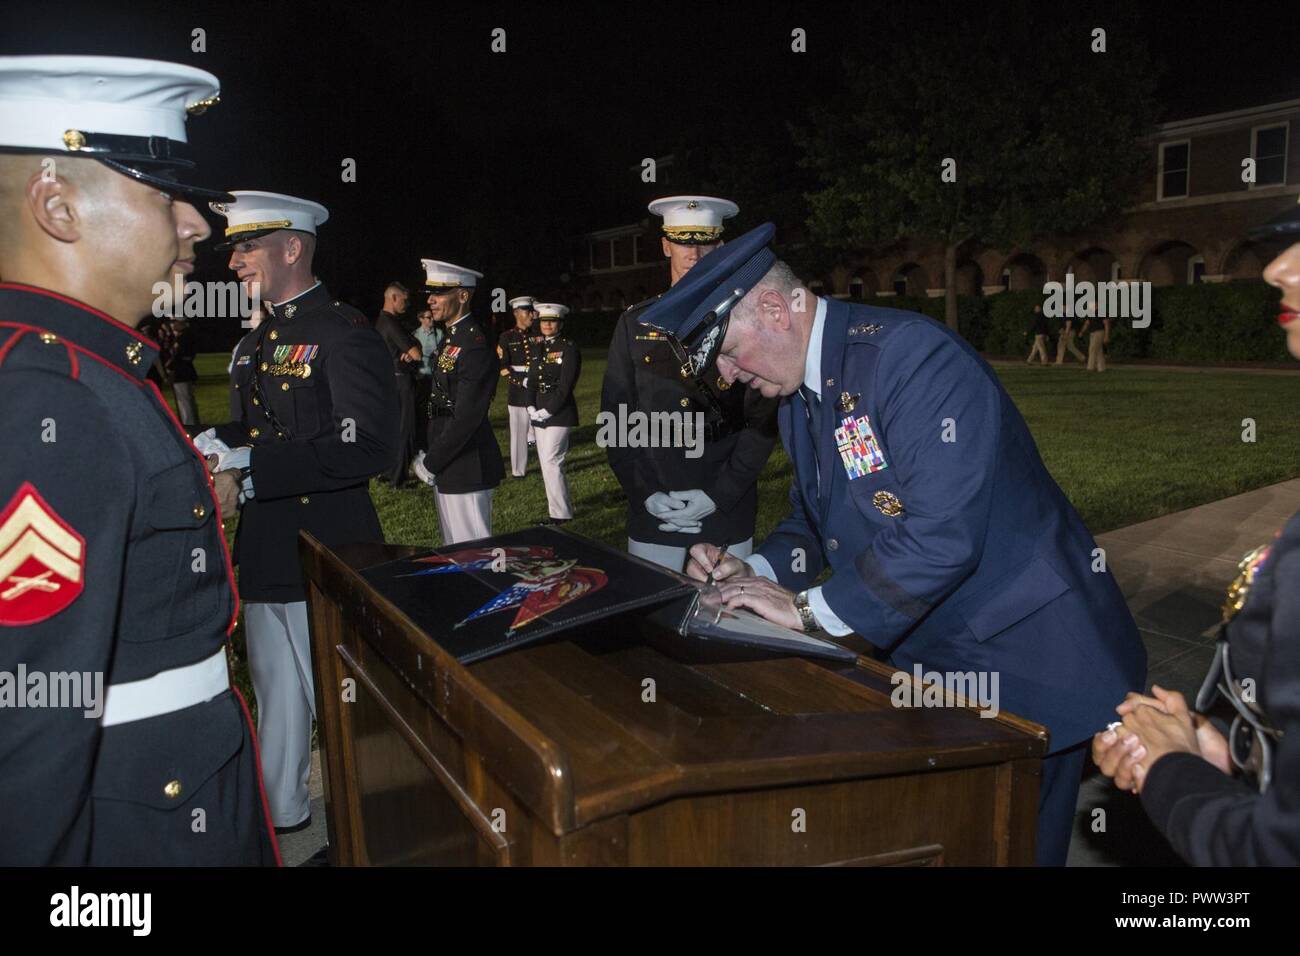 U.S. Air Force Lt. Gen. Thomas J. Trask, vice commander of Headquarters U.S. Special Operations Command (SOCOM), signs a guest book after an evening parade at Marine Barracks Washington, Washington, D.C., June 23, 2017. Evening parades are held as a means of honoring senior officials, distinguished citizens and supporters of the Marine Corps. Stock Photo